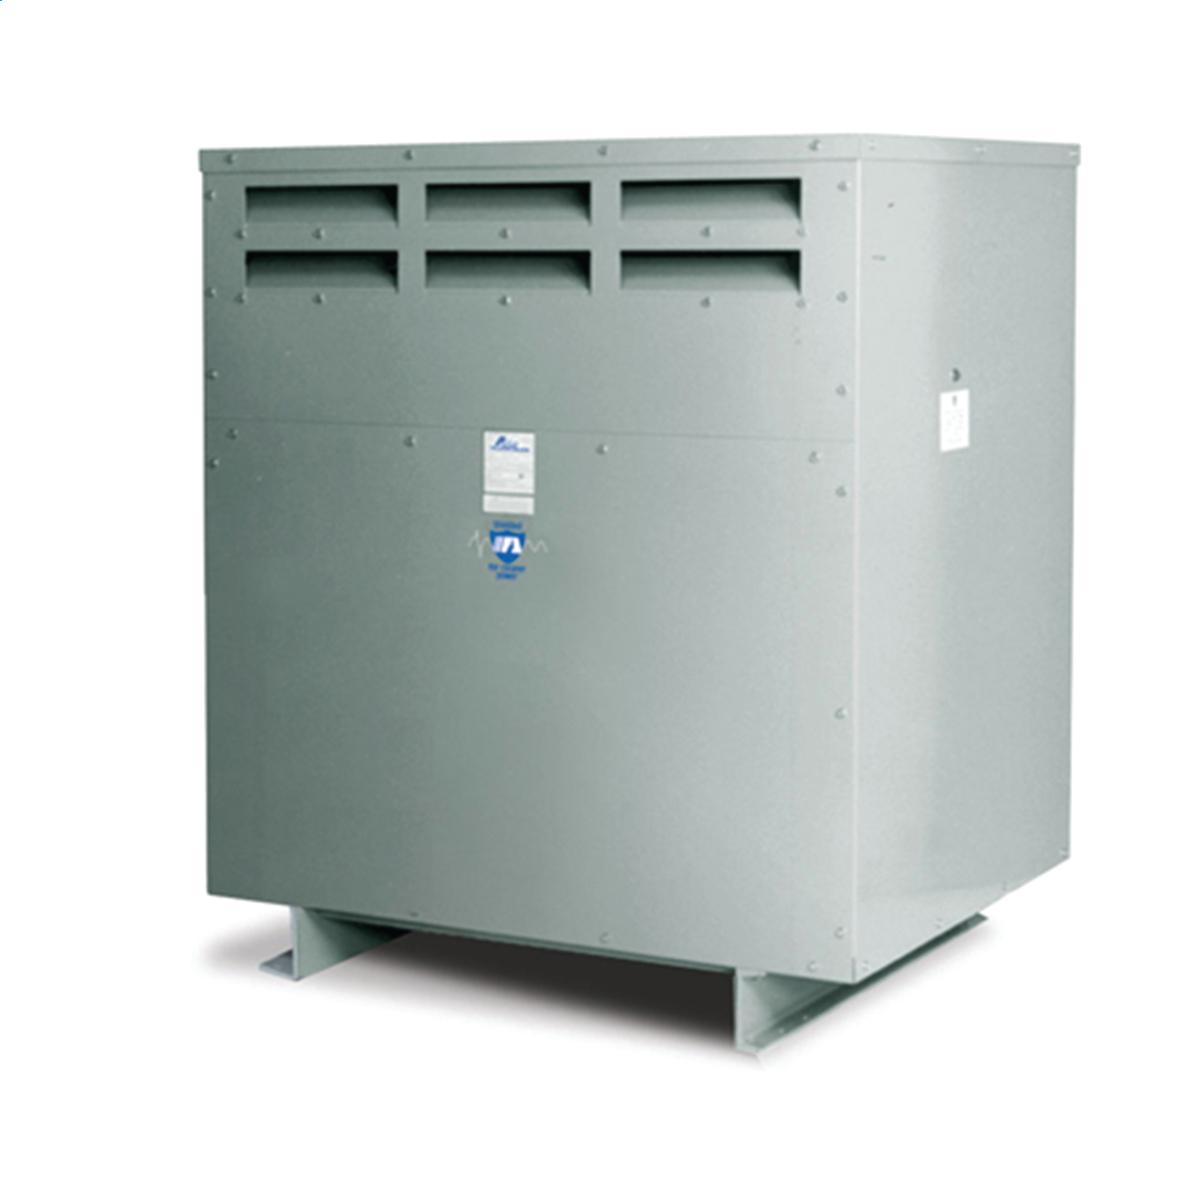 Hubbell WI001M14 Medium Voltage Transformer - Three Phase, 2400Δ - 600ΔV, 1000kVA  ; Lower operating cost over Liquid-filled ; No additional fireproofing or venting ; Long life expectancy ; Smaller, lighter easy to maintain